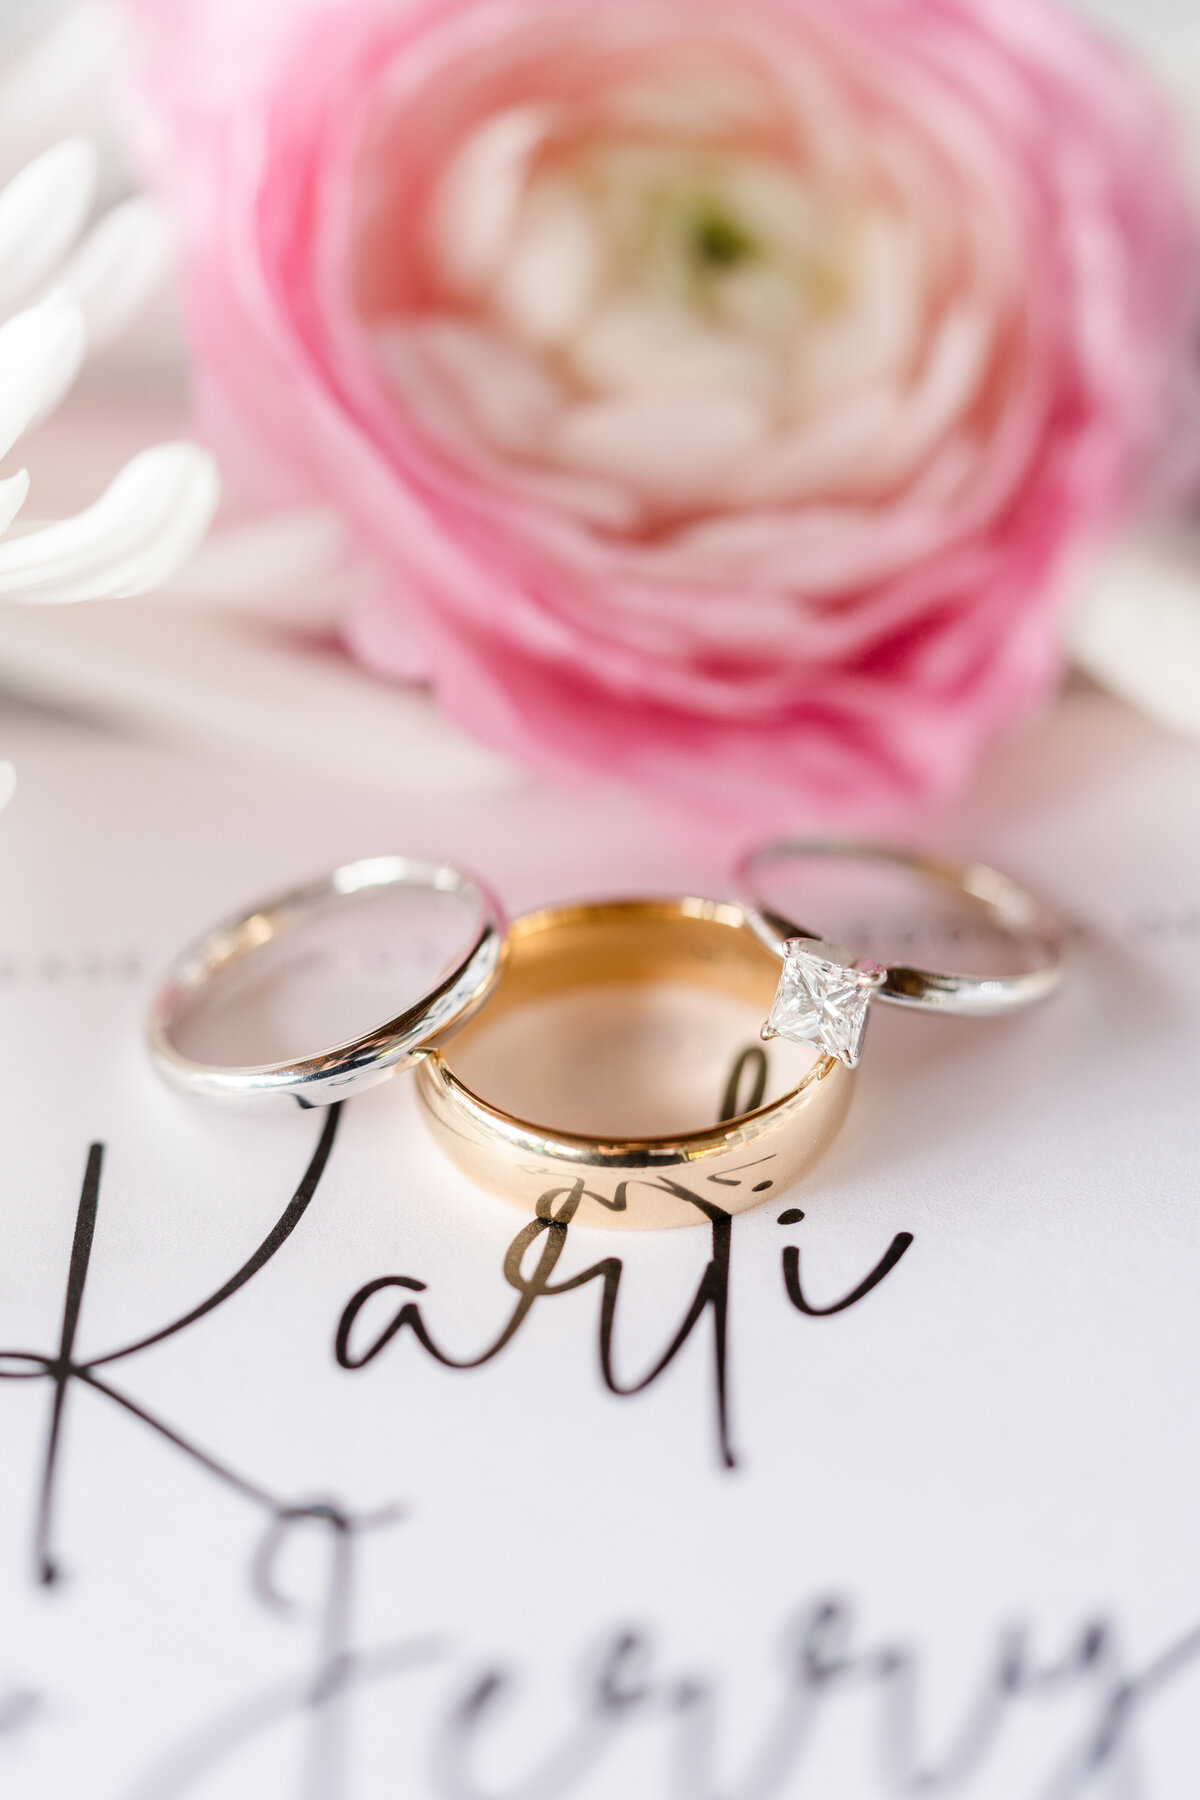 Wedding bands and engagement ring on wedding invitation with flowers in the background